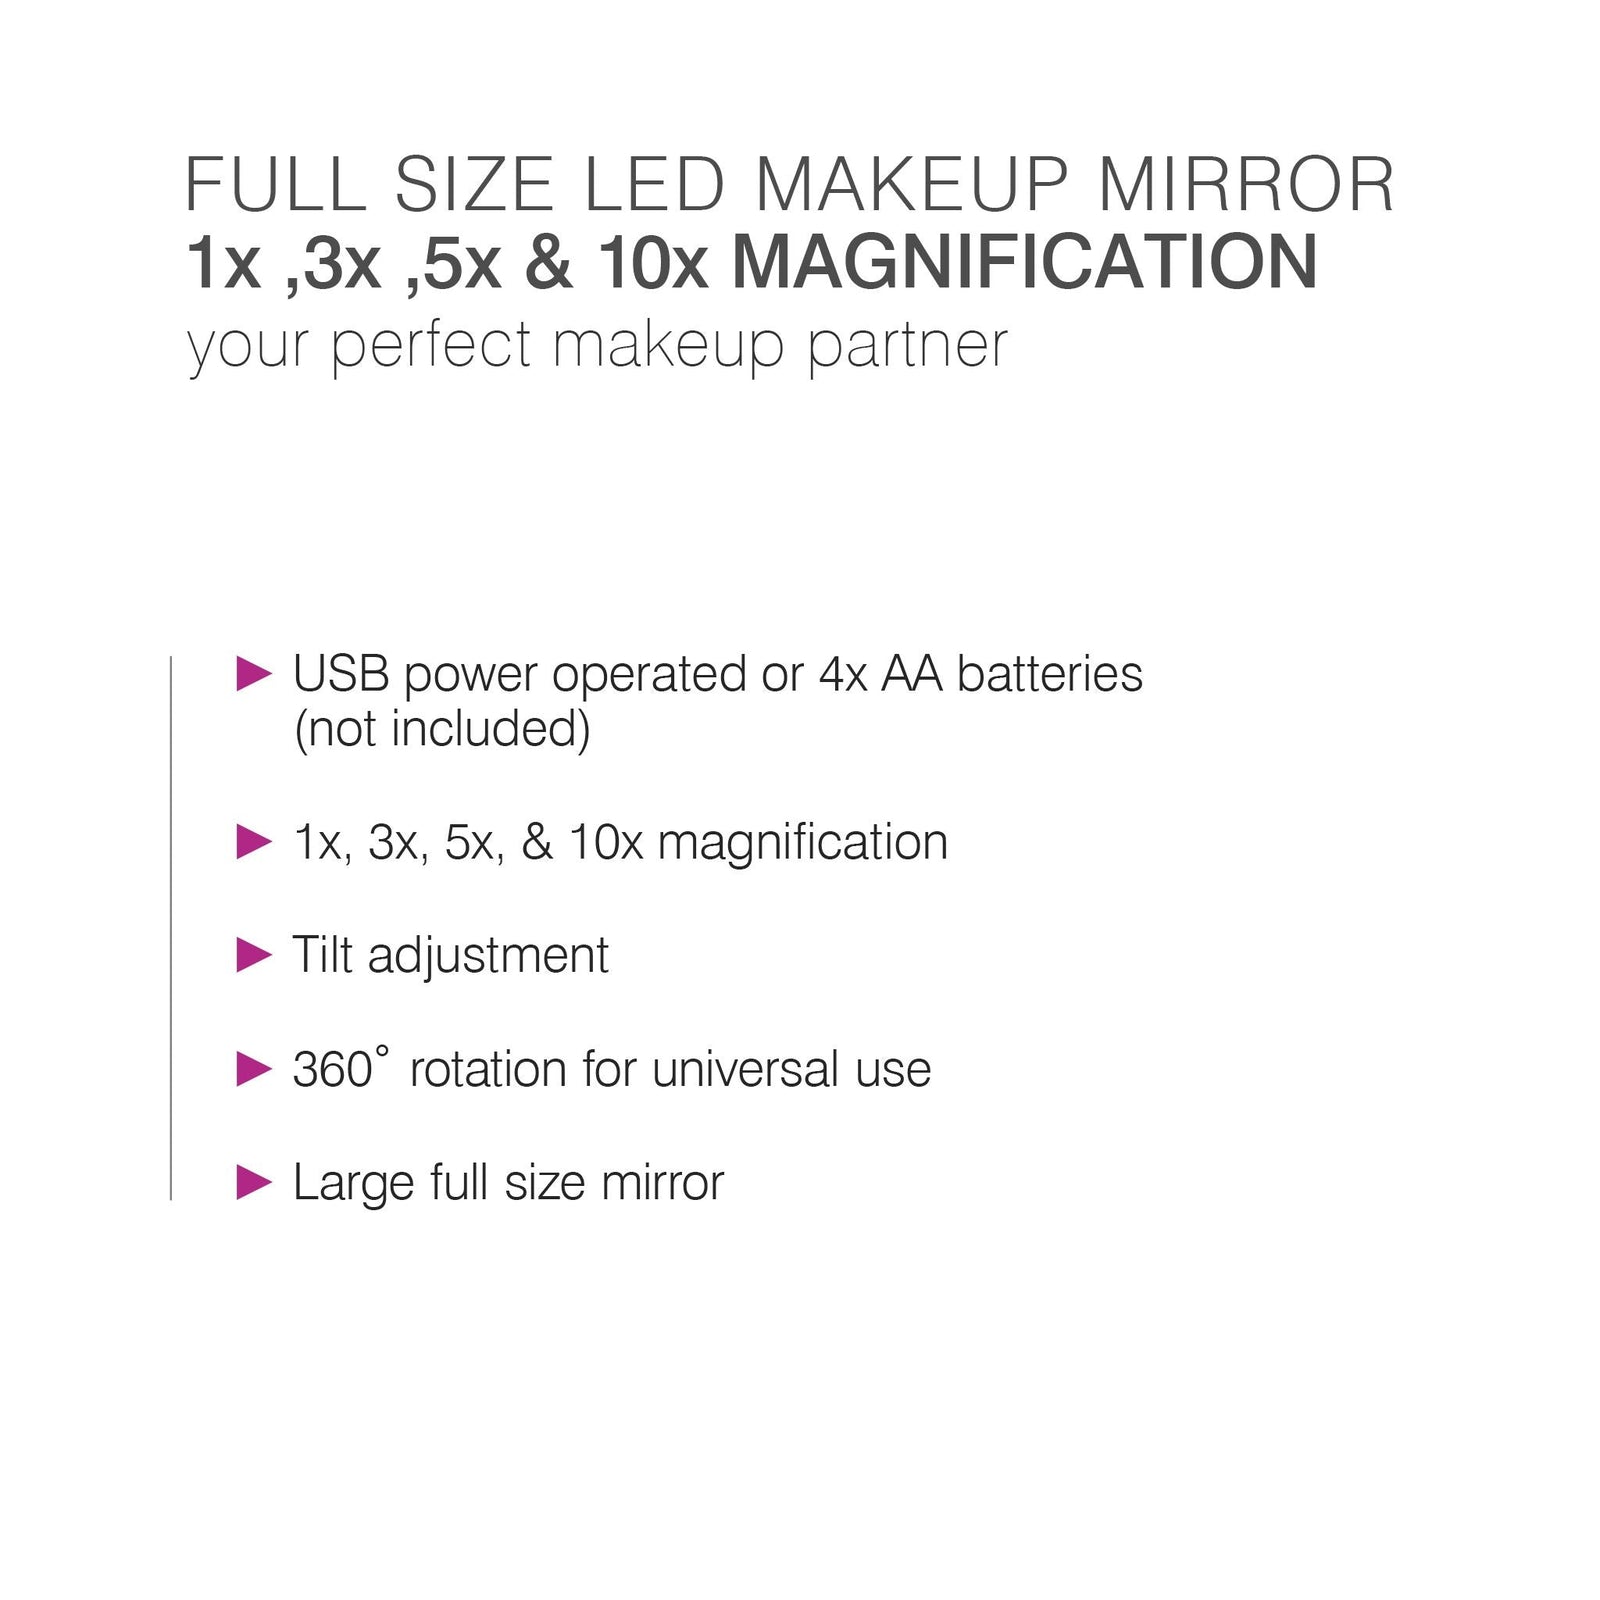 Full Size LED Makeup Mirror 1x 3x 5x & 10x Magnification - Rio the Beauty  Specialists